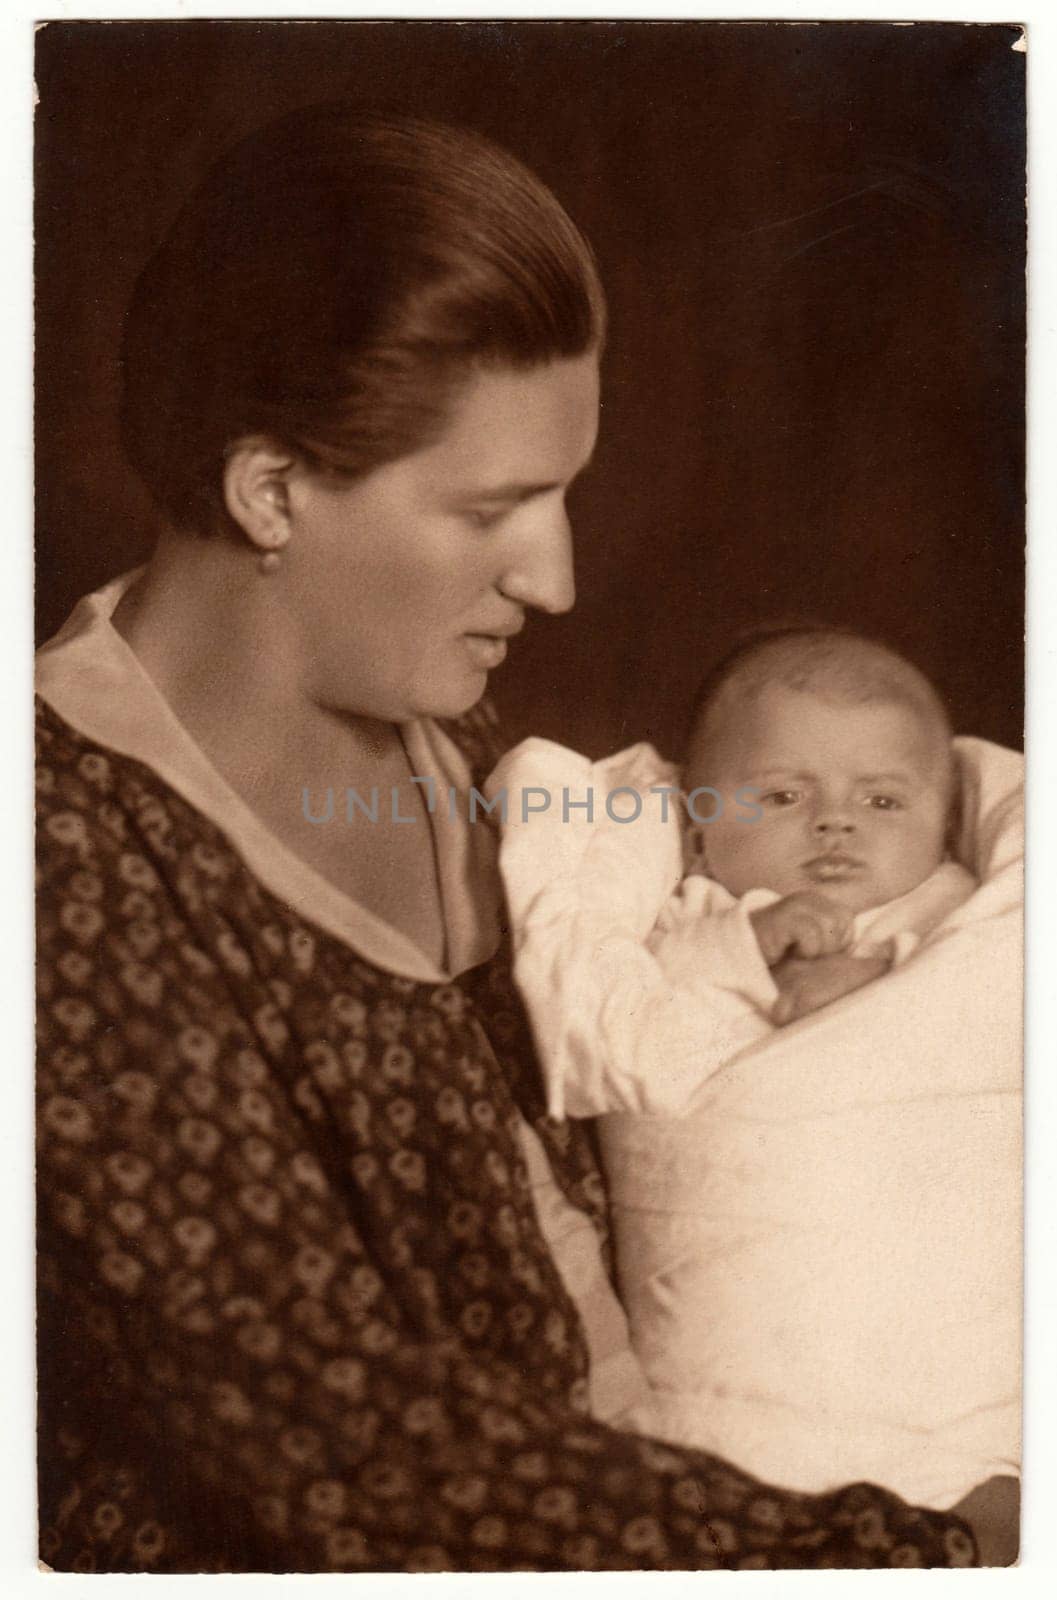 THE CZECHOSLOVAK REPUBLIC - CIRCA 1930s: Vintage photo shows woman with baby - newborn in swaddling clothes. Retro black and white studio photography.